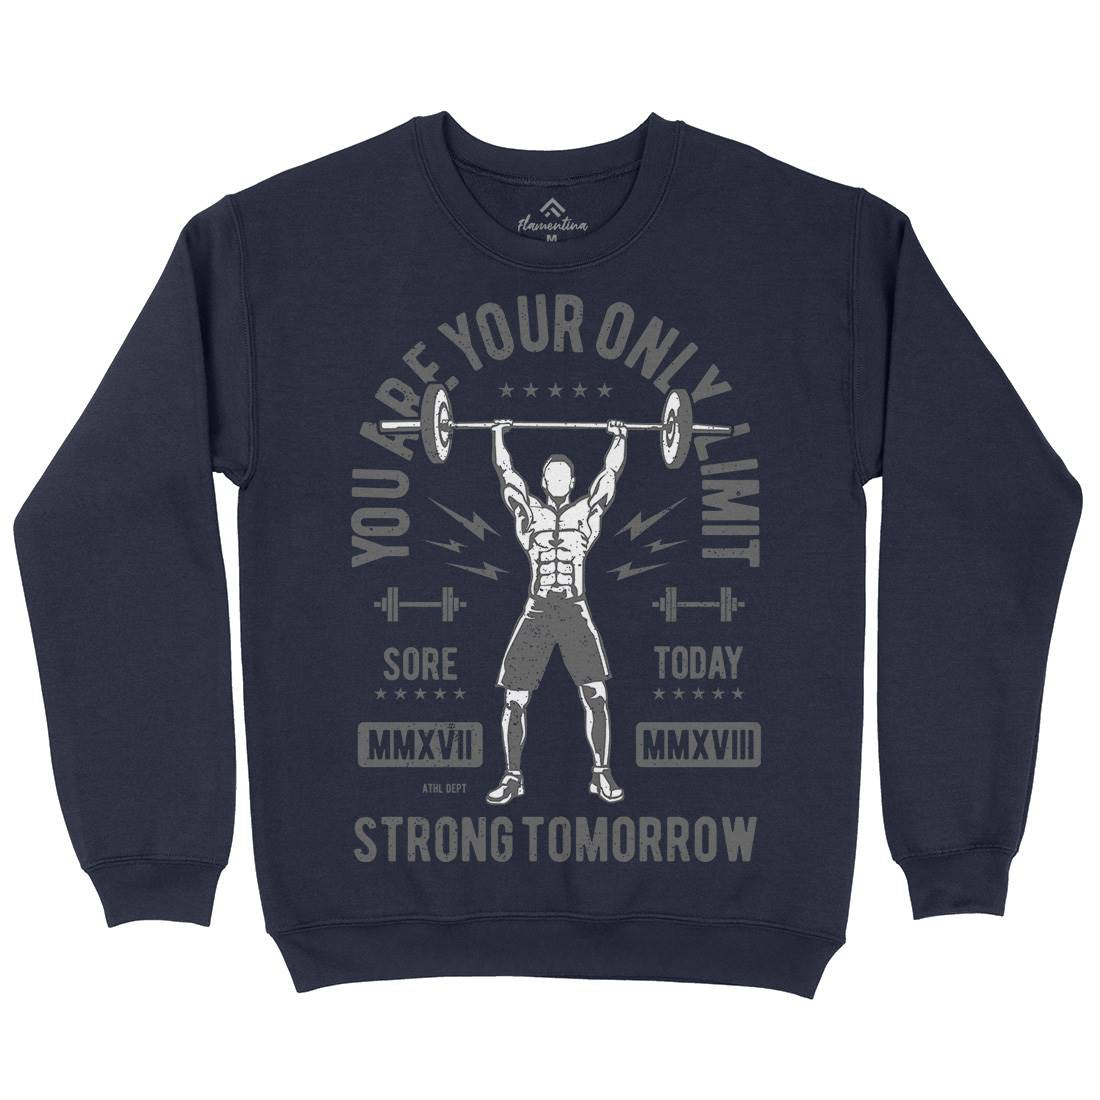 You Are Your Only Limit Kids Crew Neck Sweatshirt Gym A799